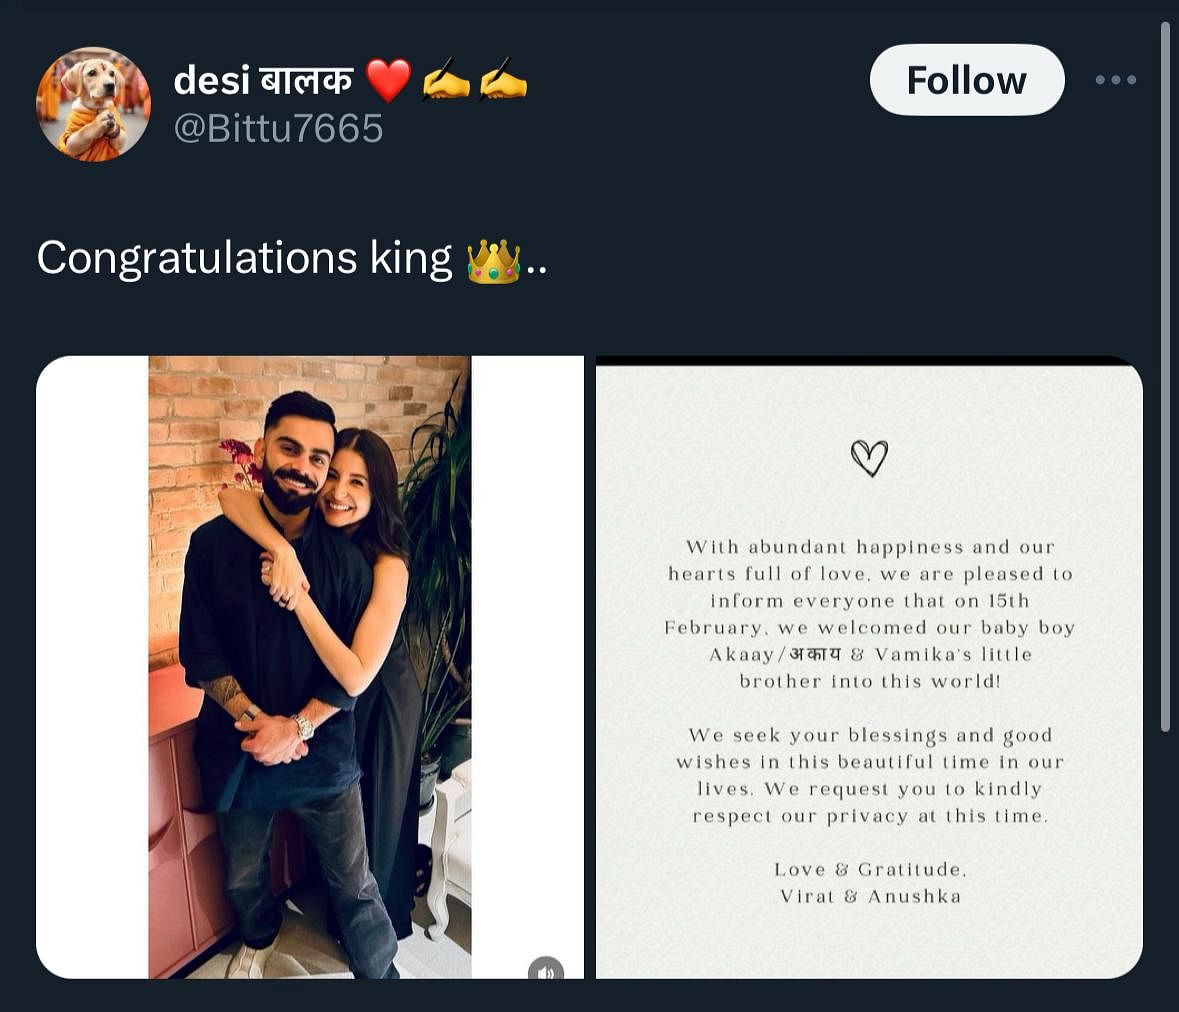 #ViratKohli and #AnushkaSharma are blessed with a baby boy. The couple has named their son "Akaay."